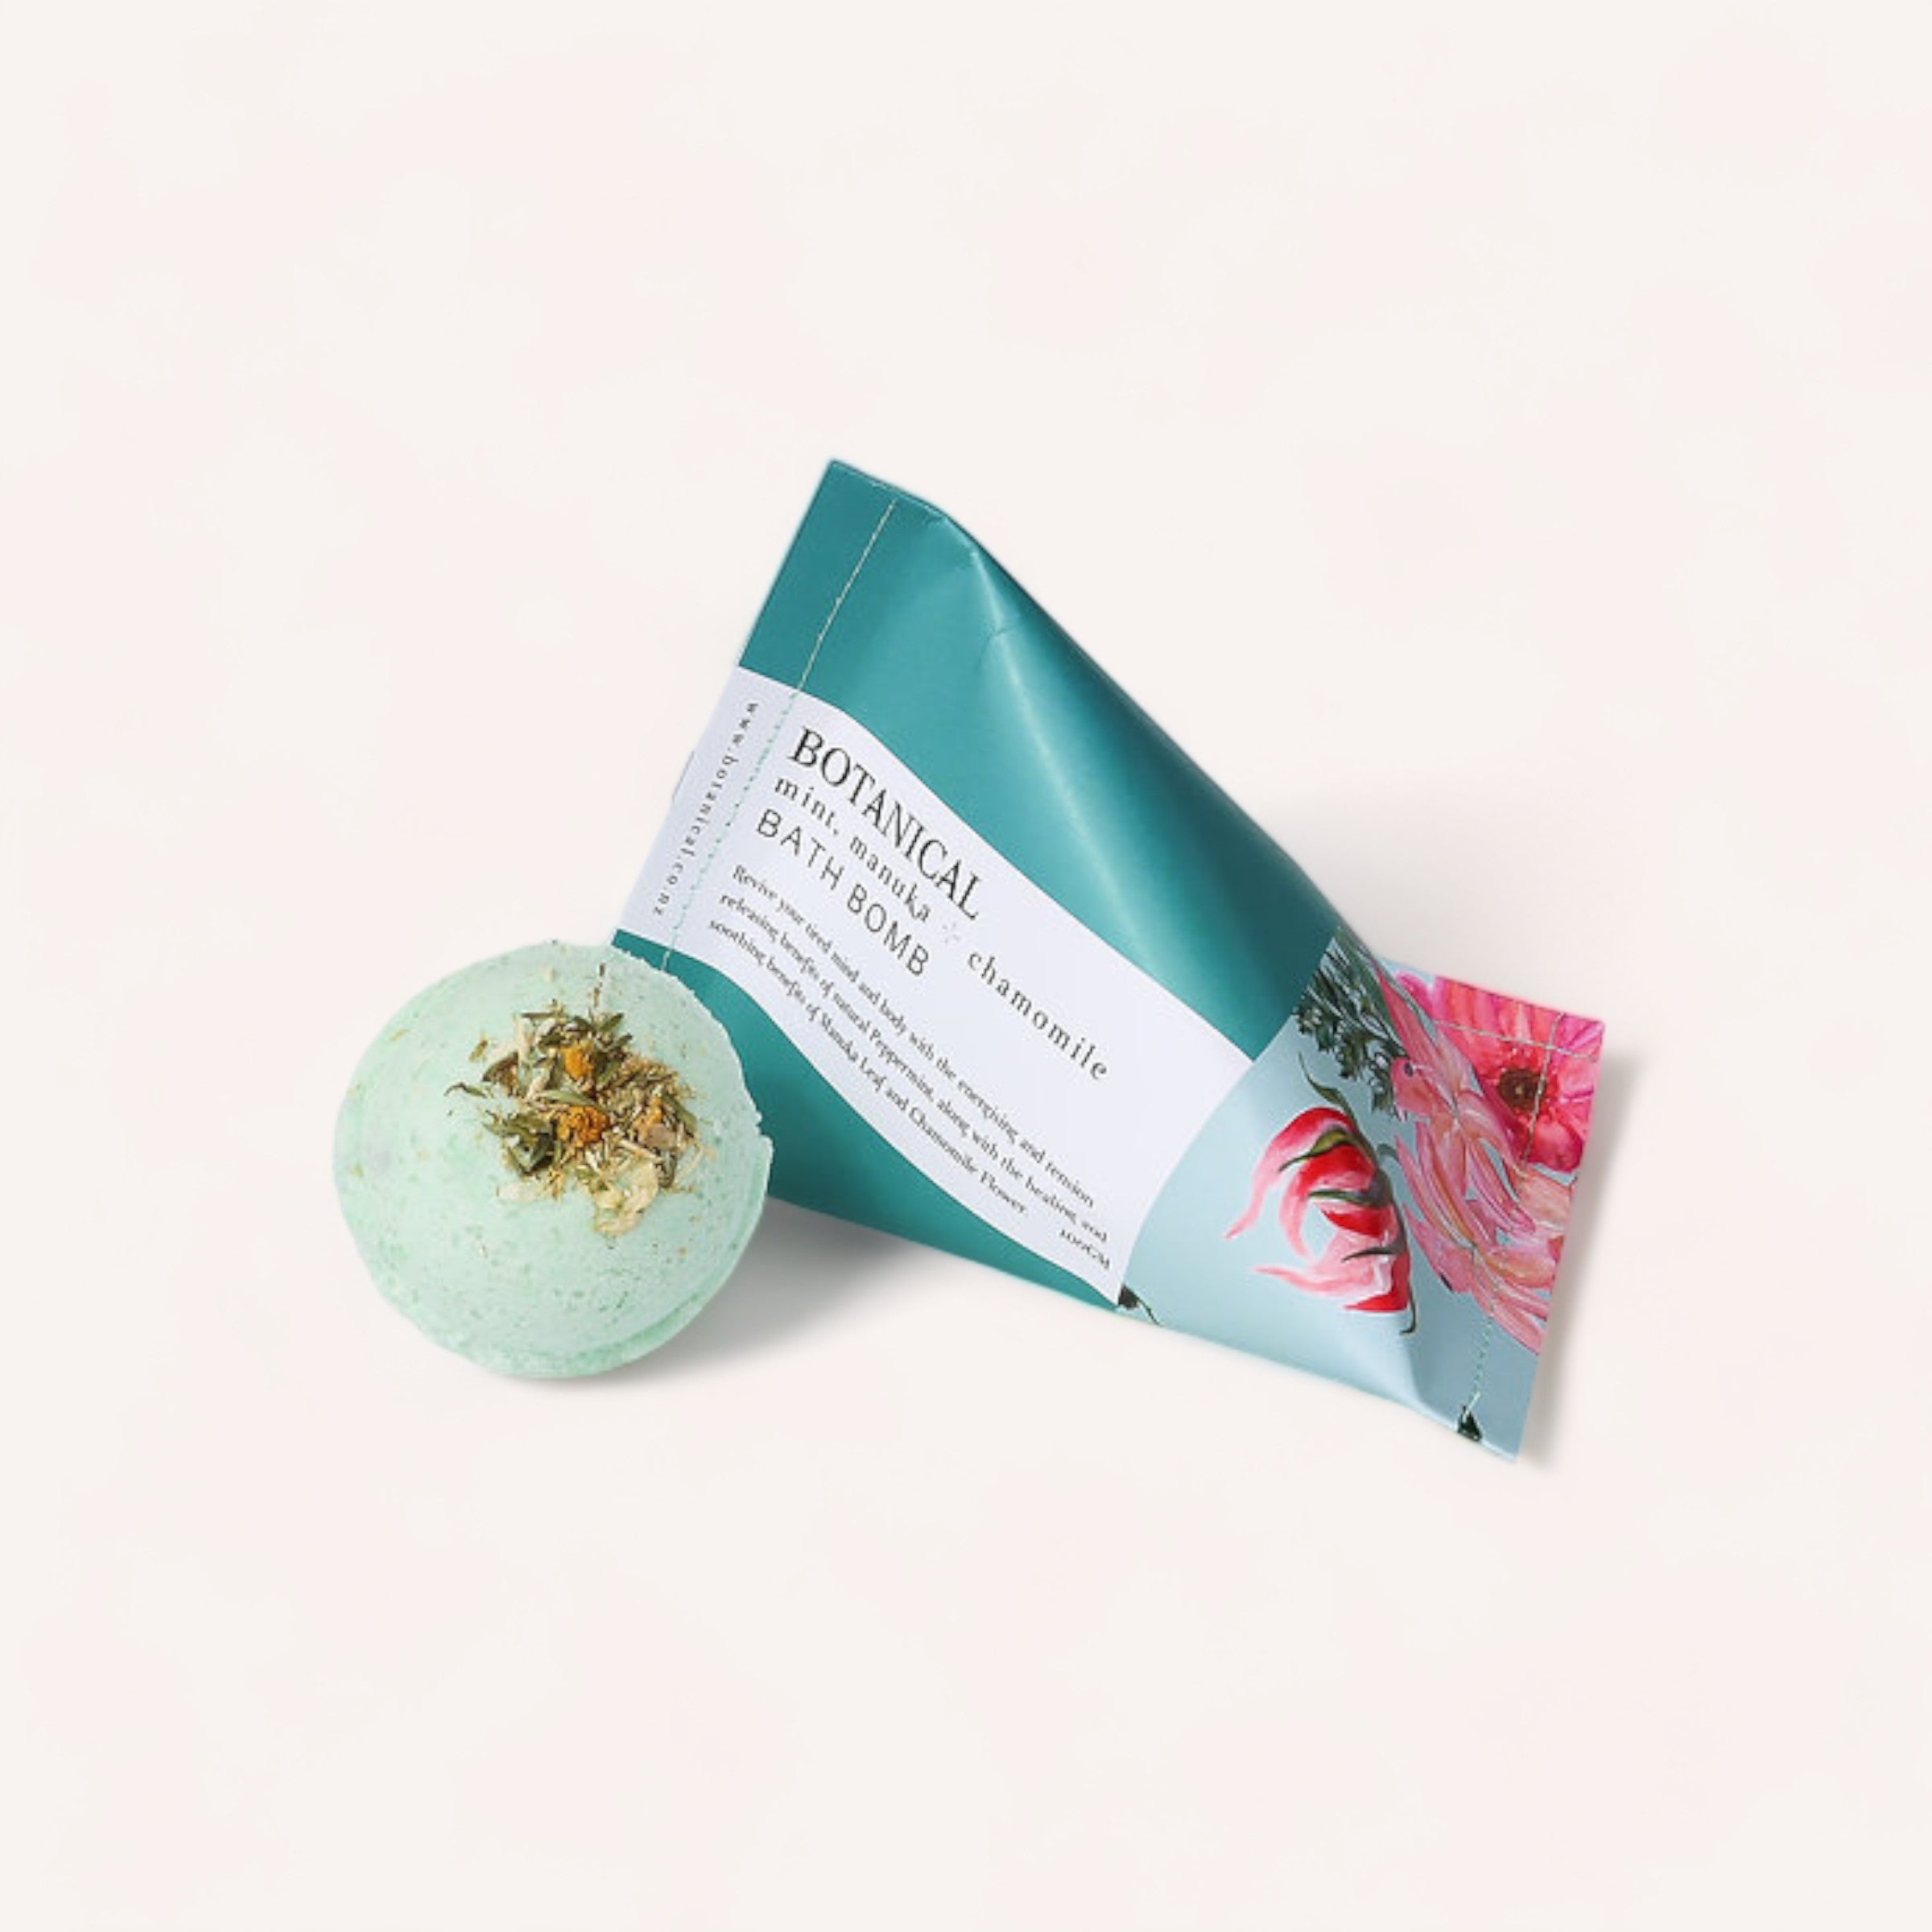 A Mint, Manuka & Chamomile Bath Bomb by Botanical Skin Care and its packaging on a clean, white background.